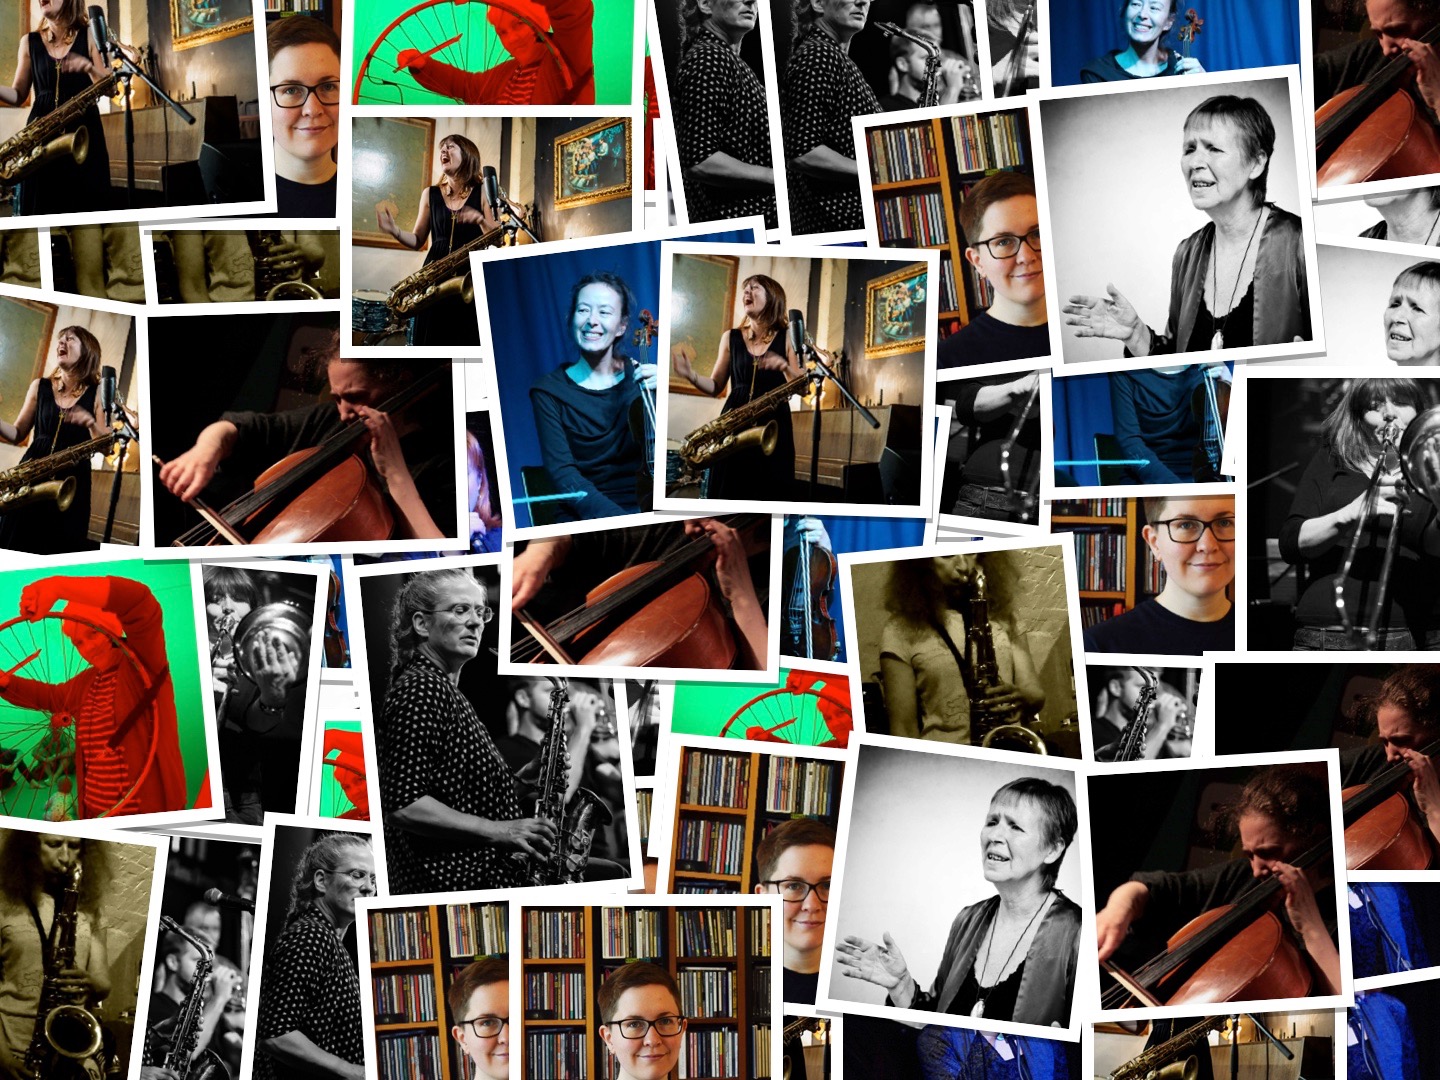 Photo montage of all the female improvisers in the series